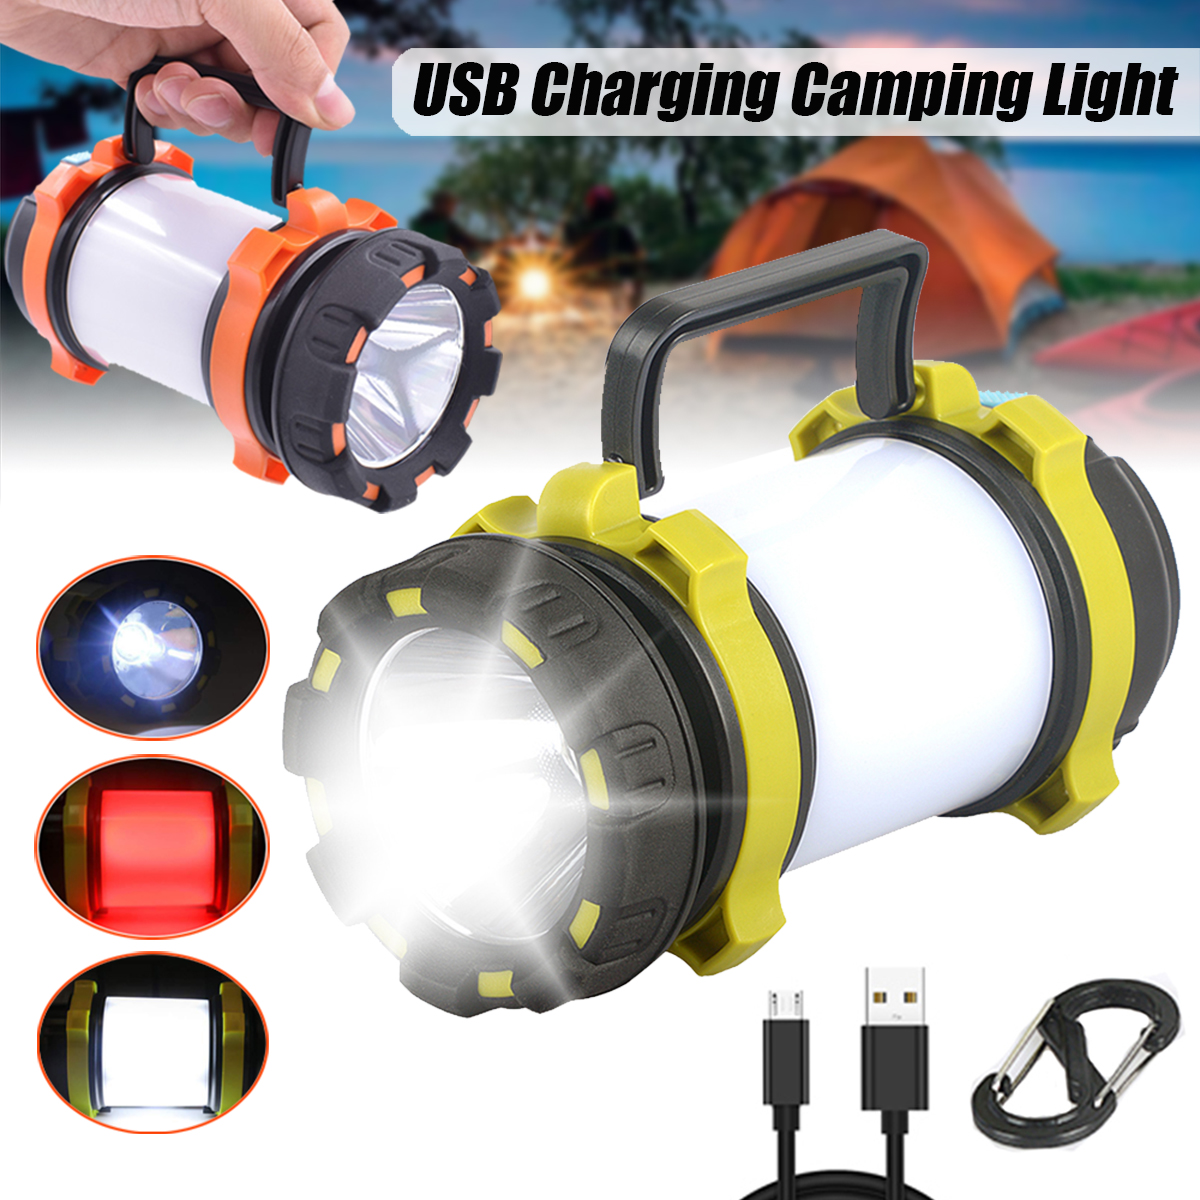 LED-Flashlight-Camping-Light-Torch-Lantern-USB-Rechargeable-USB-Charger-Worklight-Waterproof-1612111-1